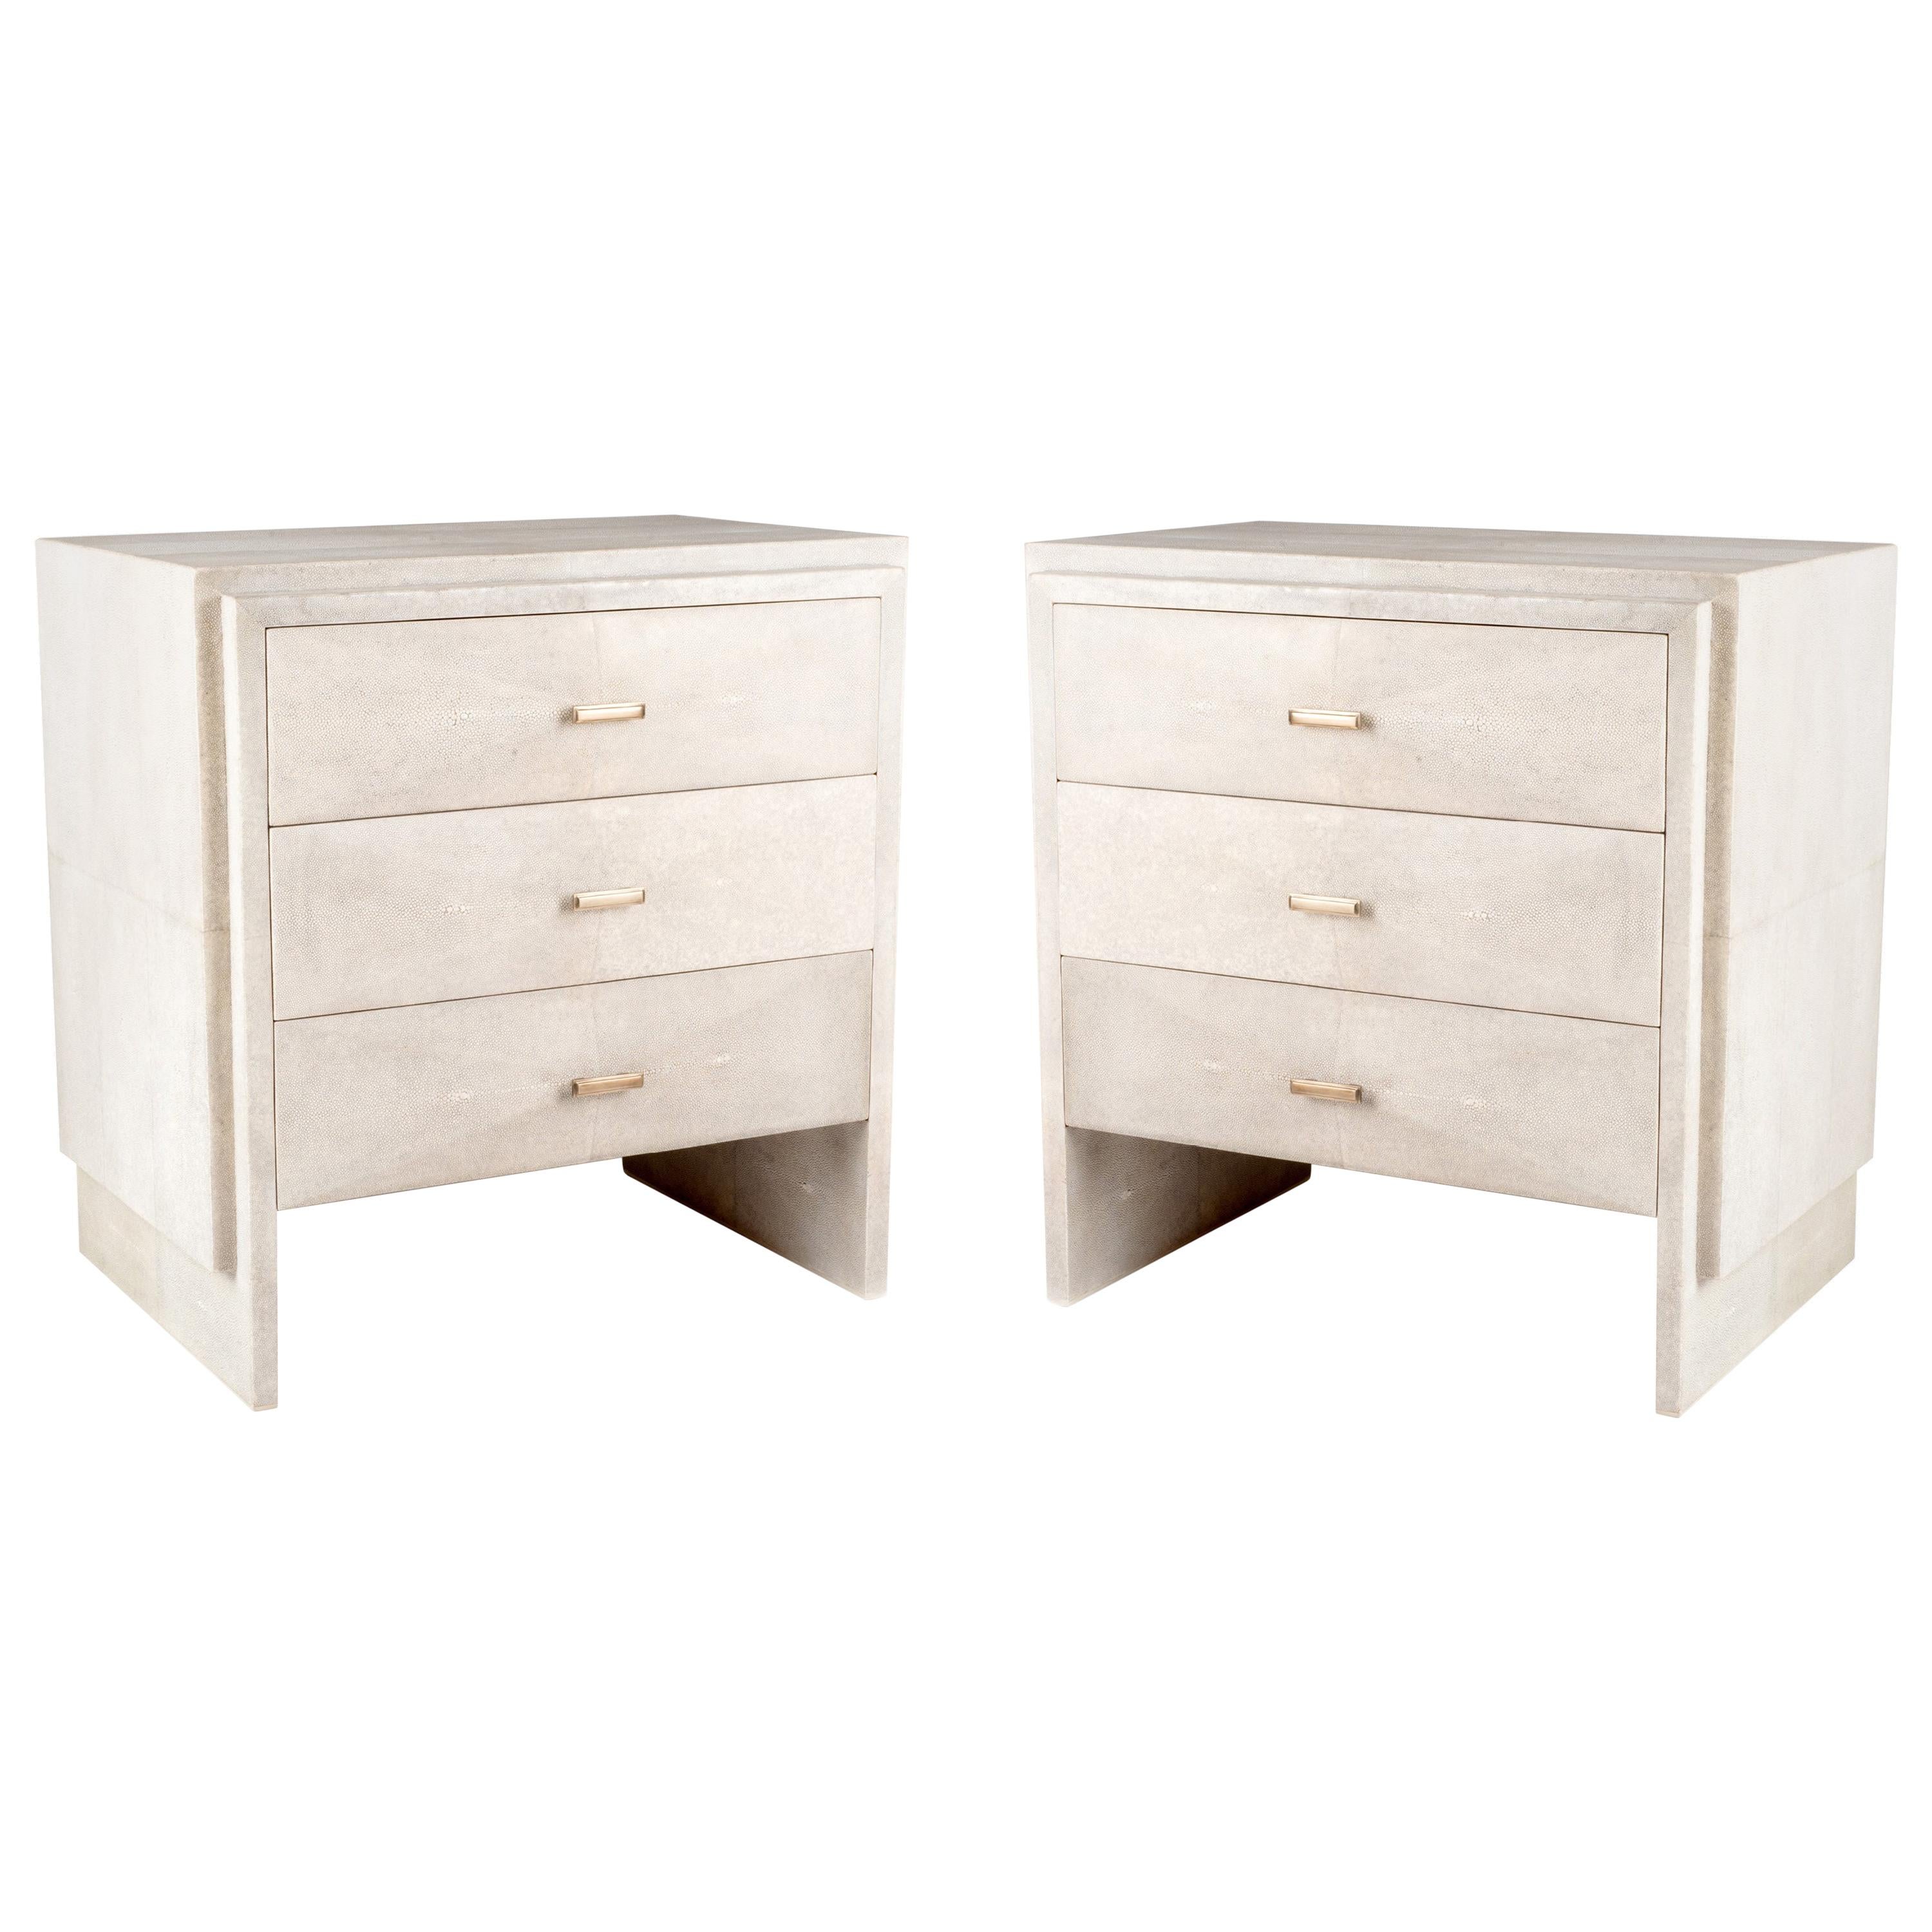 Set of Two Shagreen Nightstands with beveled drawers by R&Y Augousti